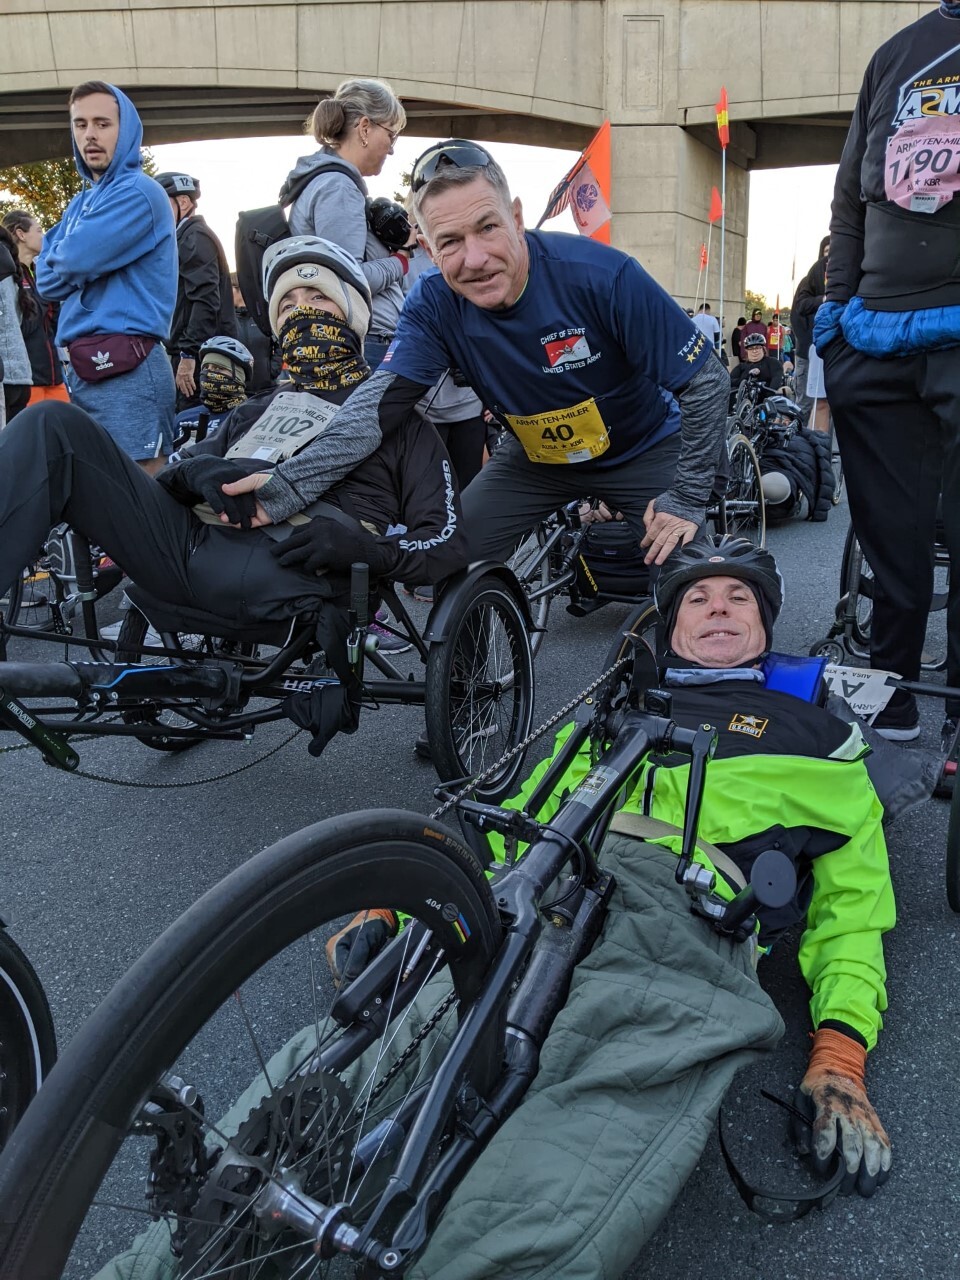 Rory Cooper in a handcycle at the Army Ten Miler Race.